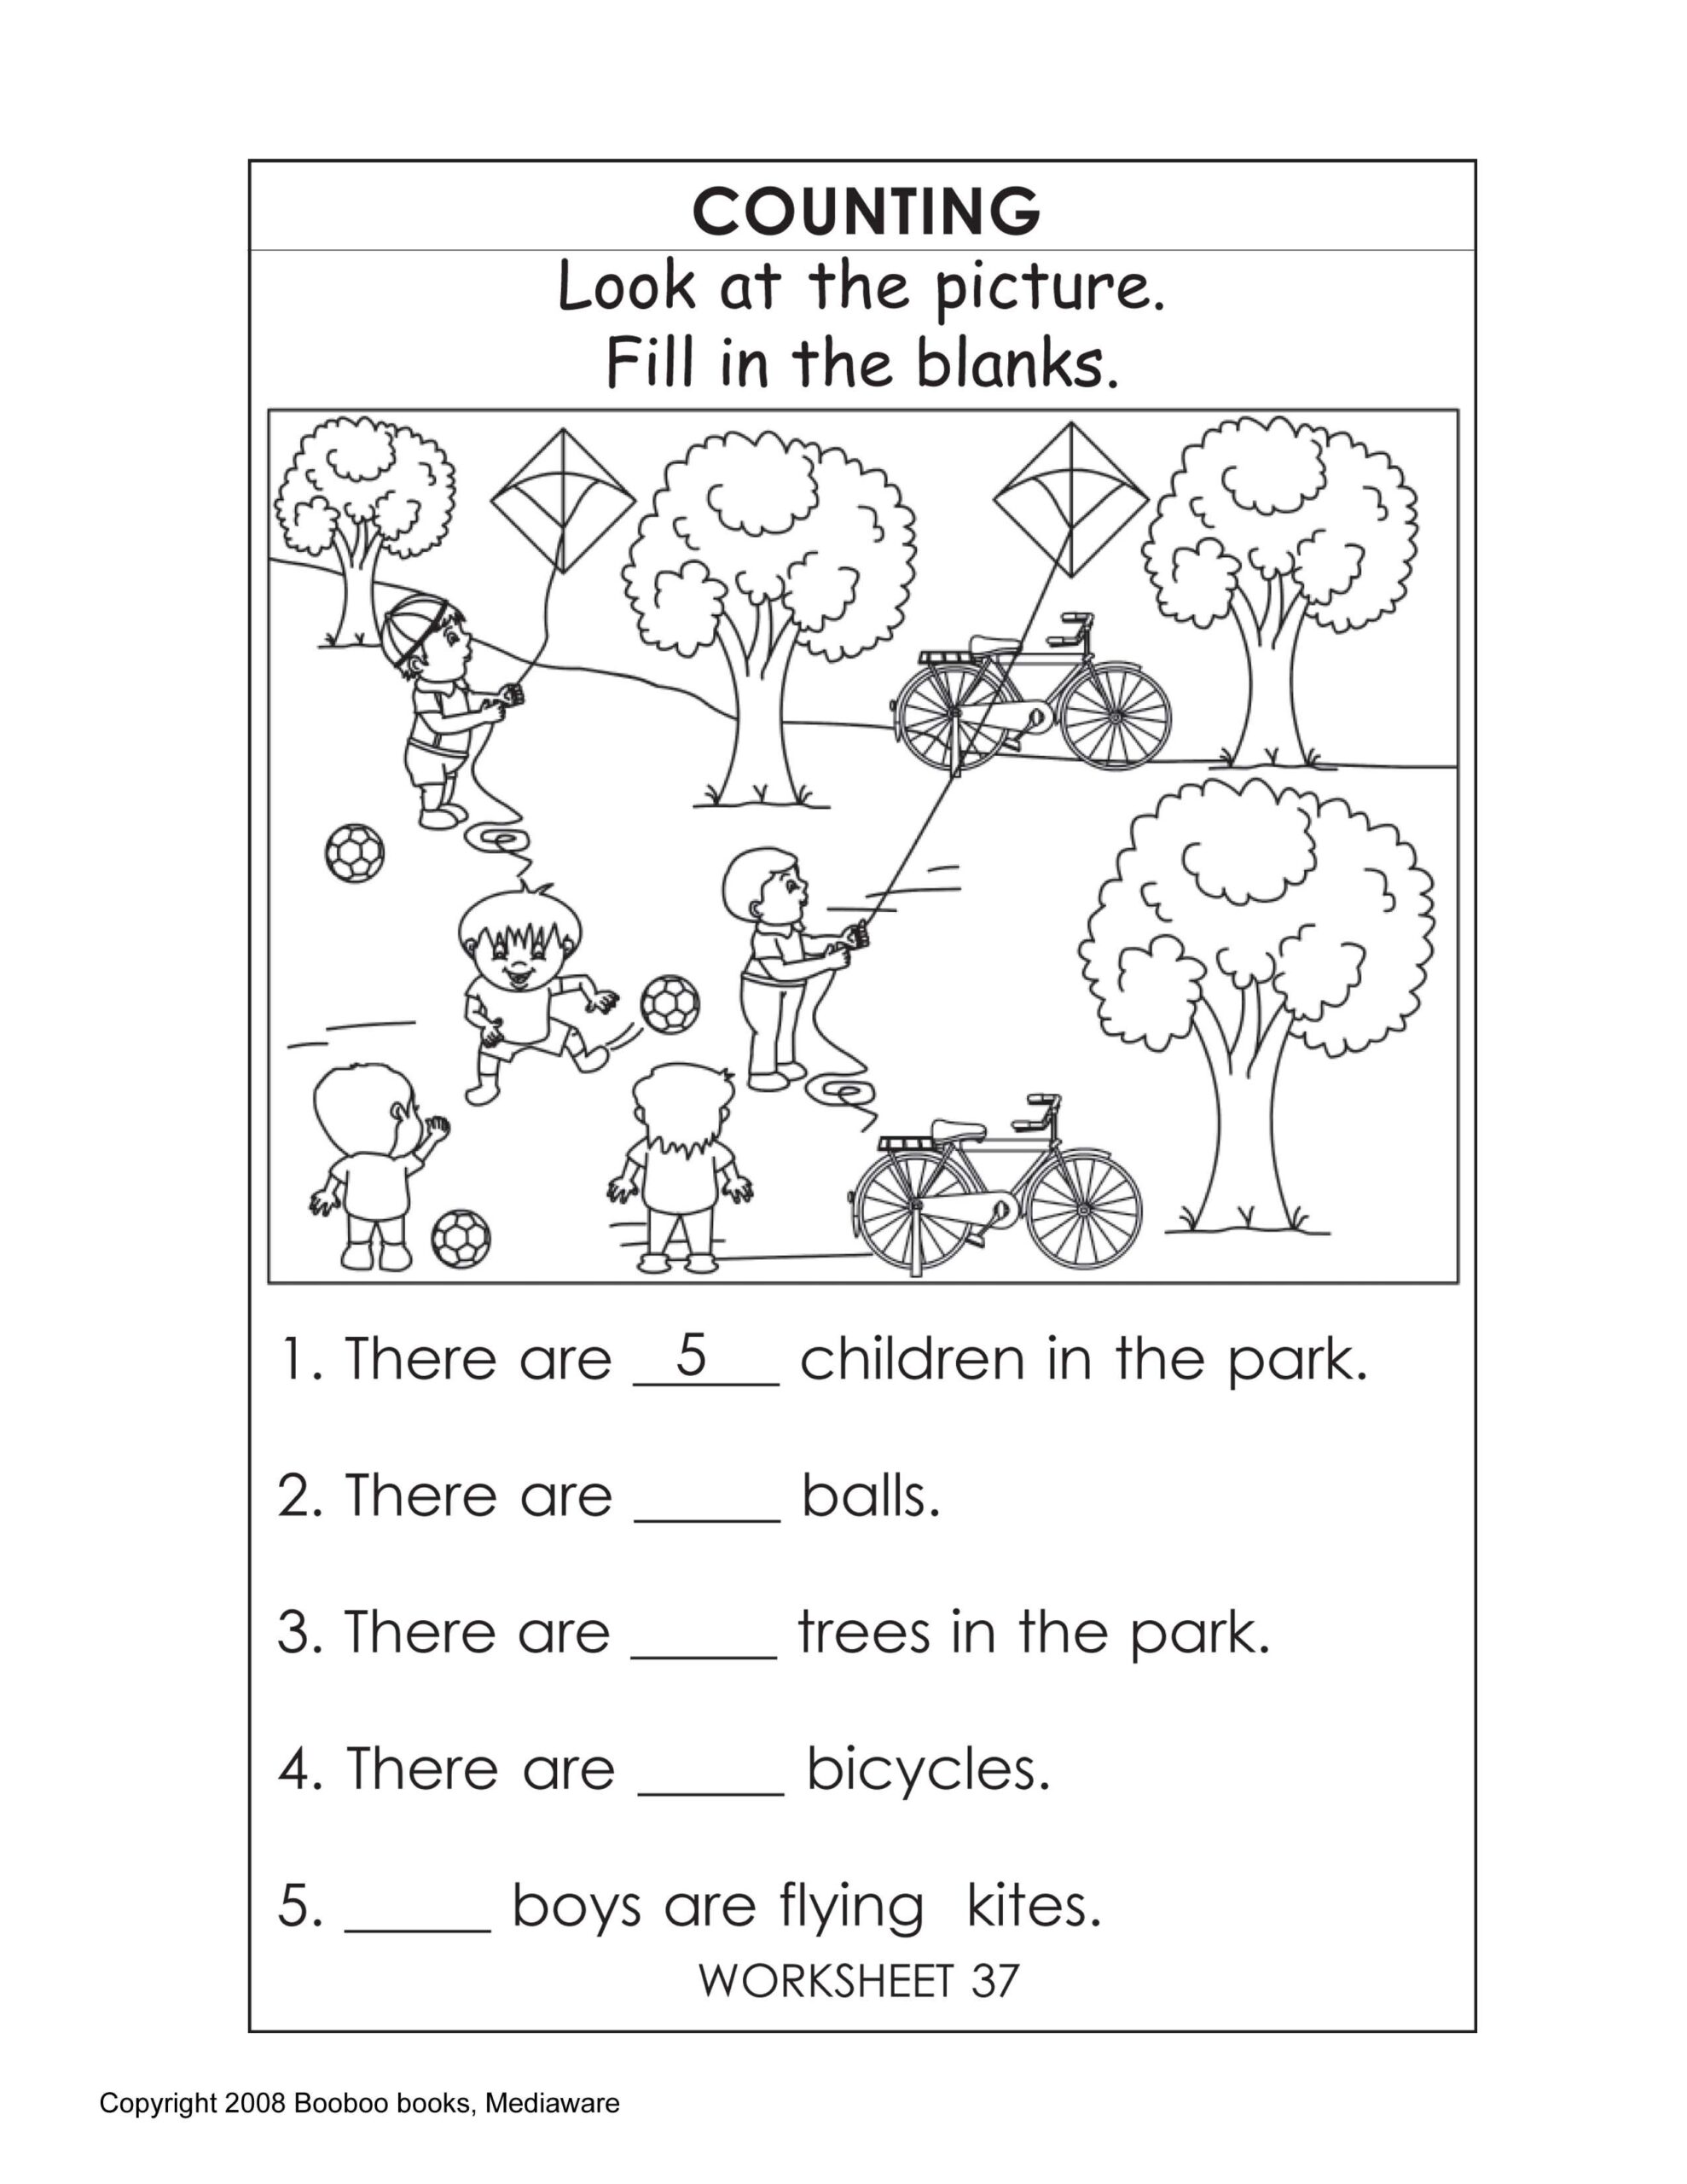 A Guide To Using Printable Kindergarten Worksheets Free Kindergarten Worksheets Kindergarten Worksheets Printable Social Studies Worksheets